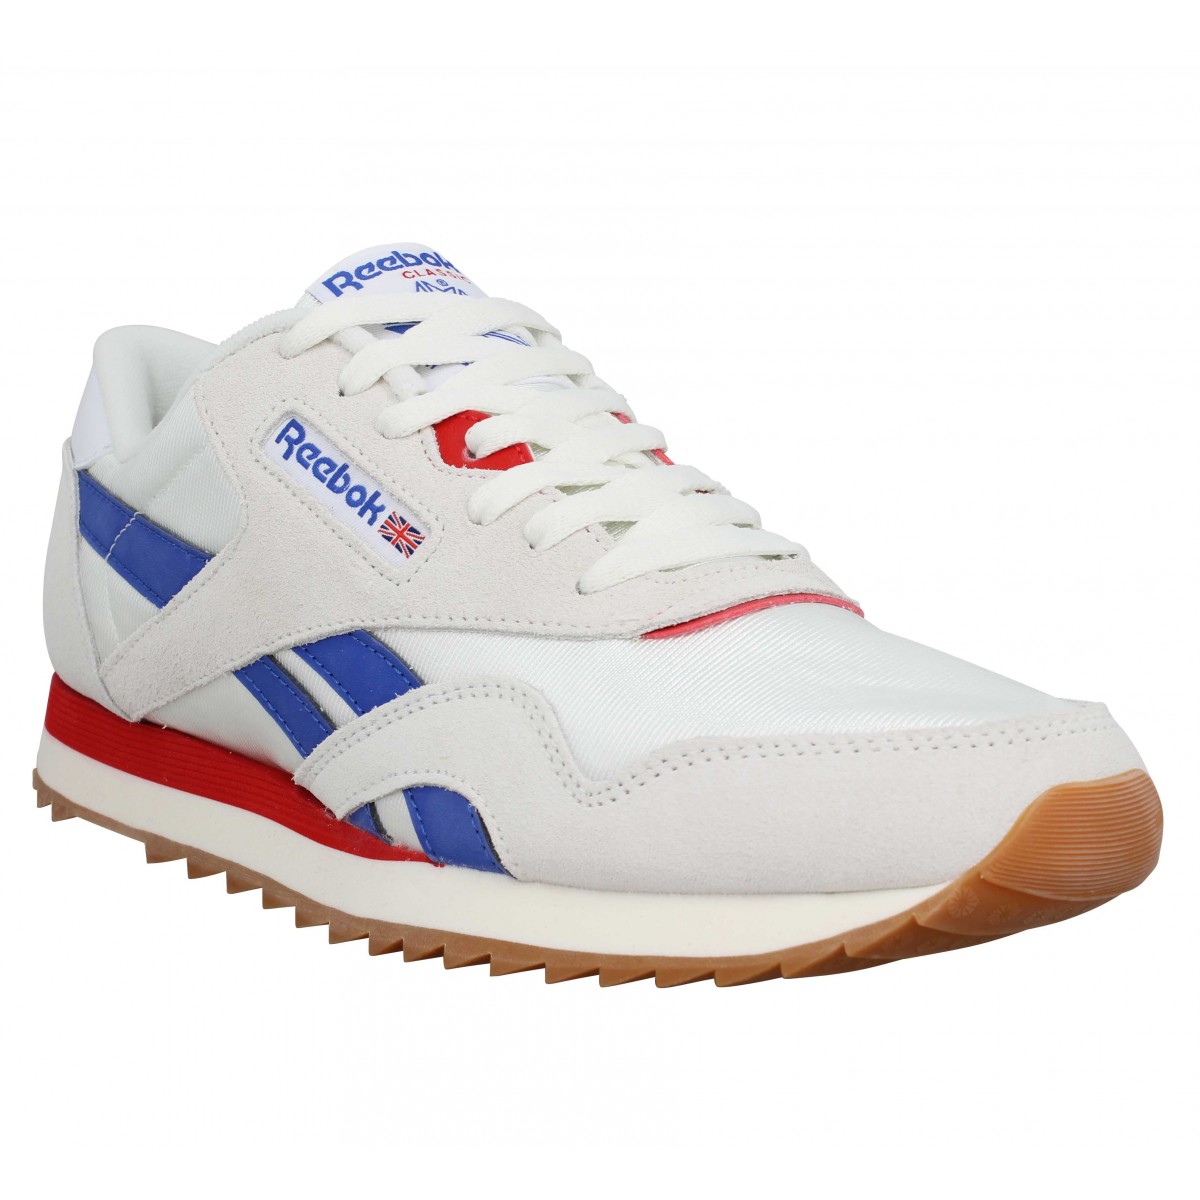 reebok homme classic nylon, OFF 78%,Special offer!